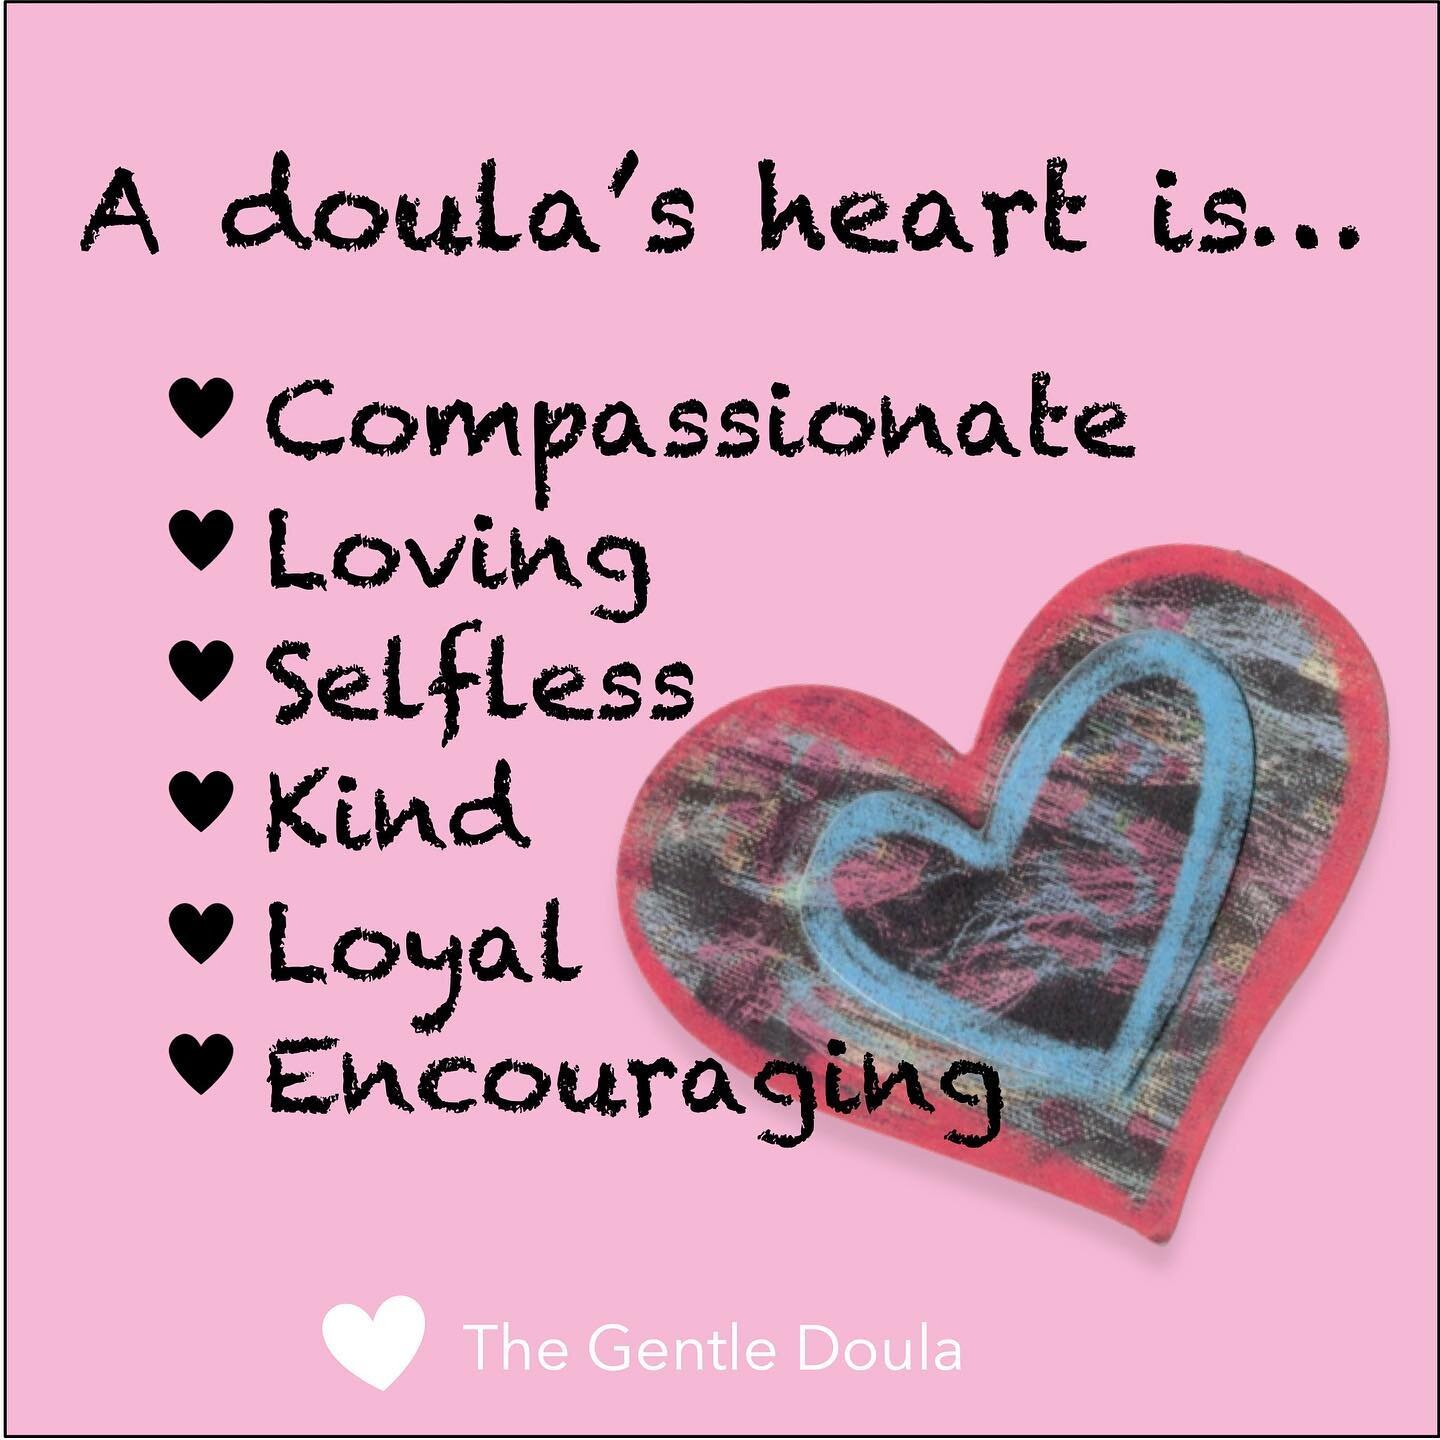 A doula&rsquo;s heart &ndash; her driving force &ndash; can be summed up as the goal to simply do all she can to support her client. 
.
Listening, informing, comforting, holding space. 
.
From the months they journey together through pregnancy, to th